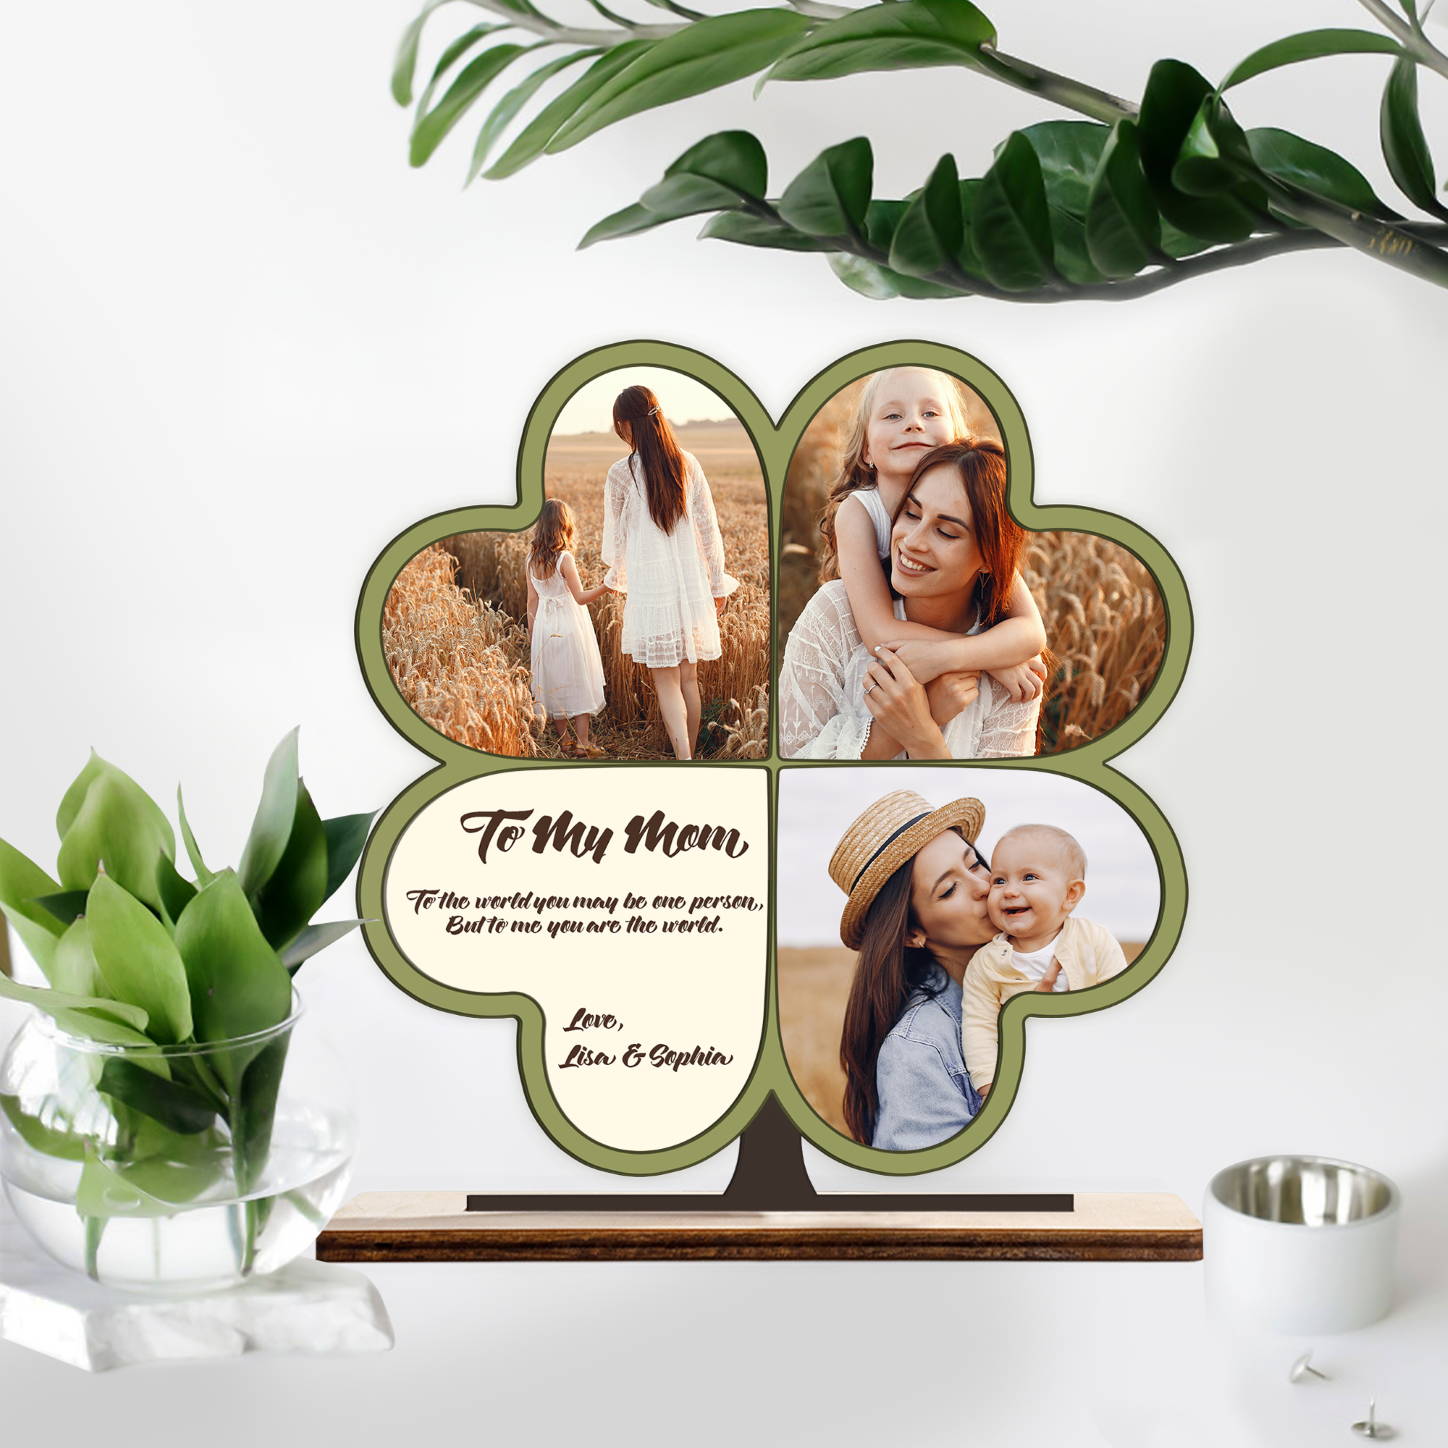 A plaque with a 4-leaf clover with a meaningful image of you and your mother will be a gift to bring her luck.